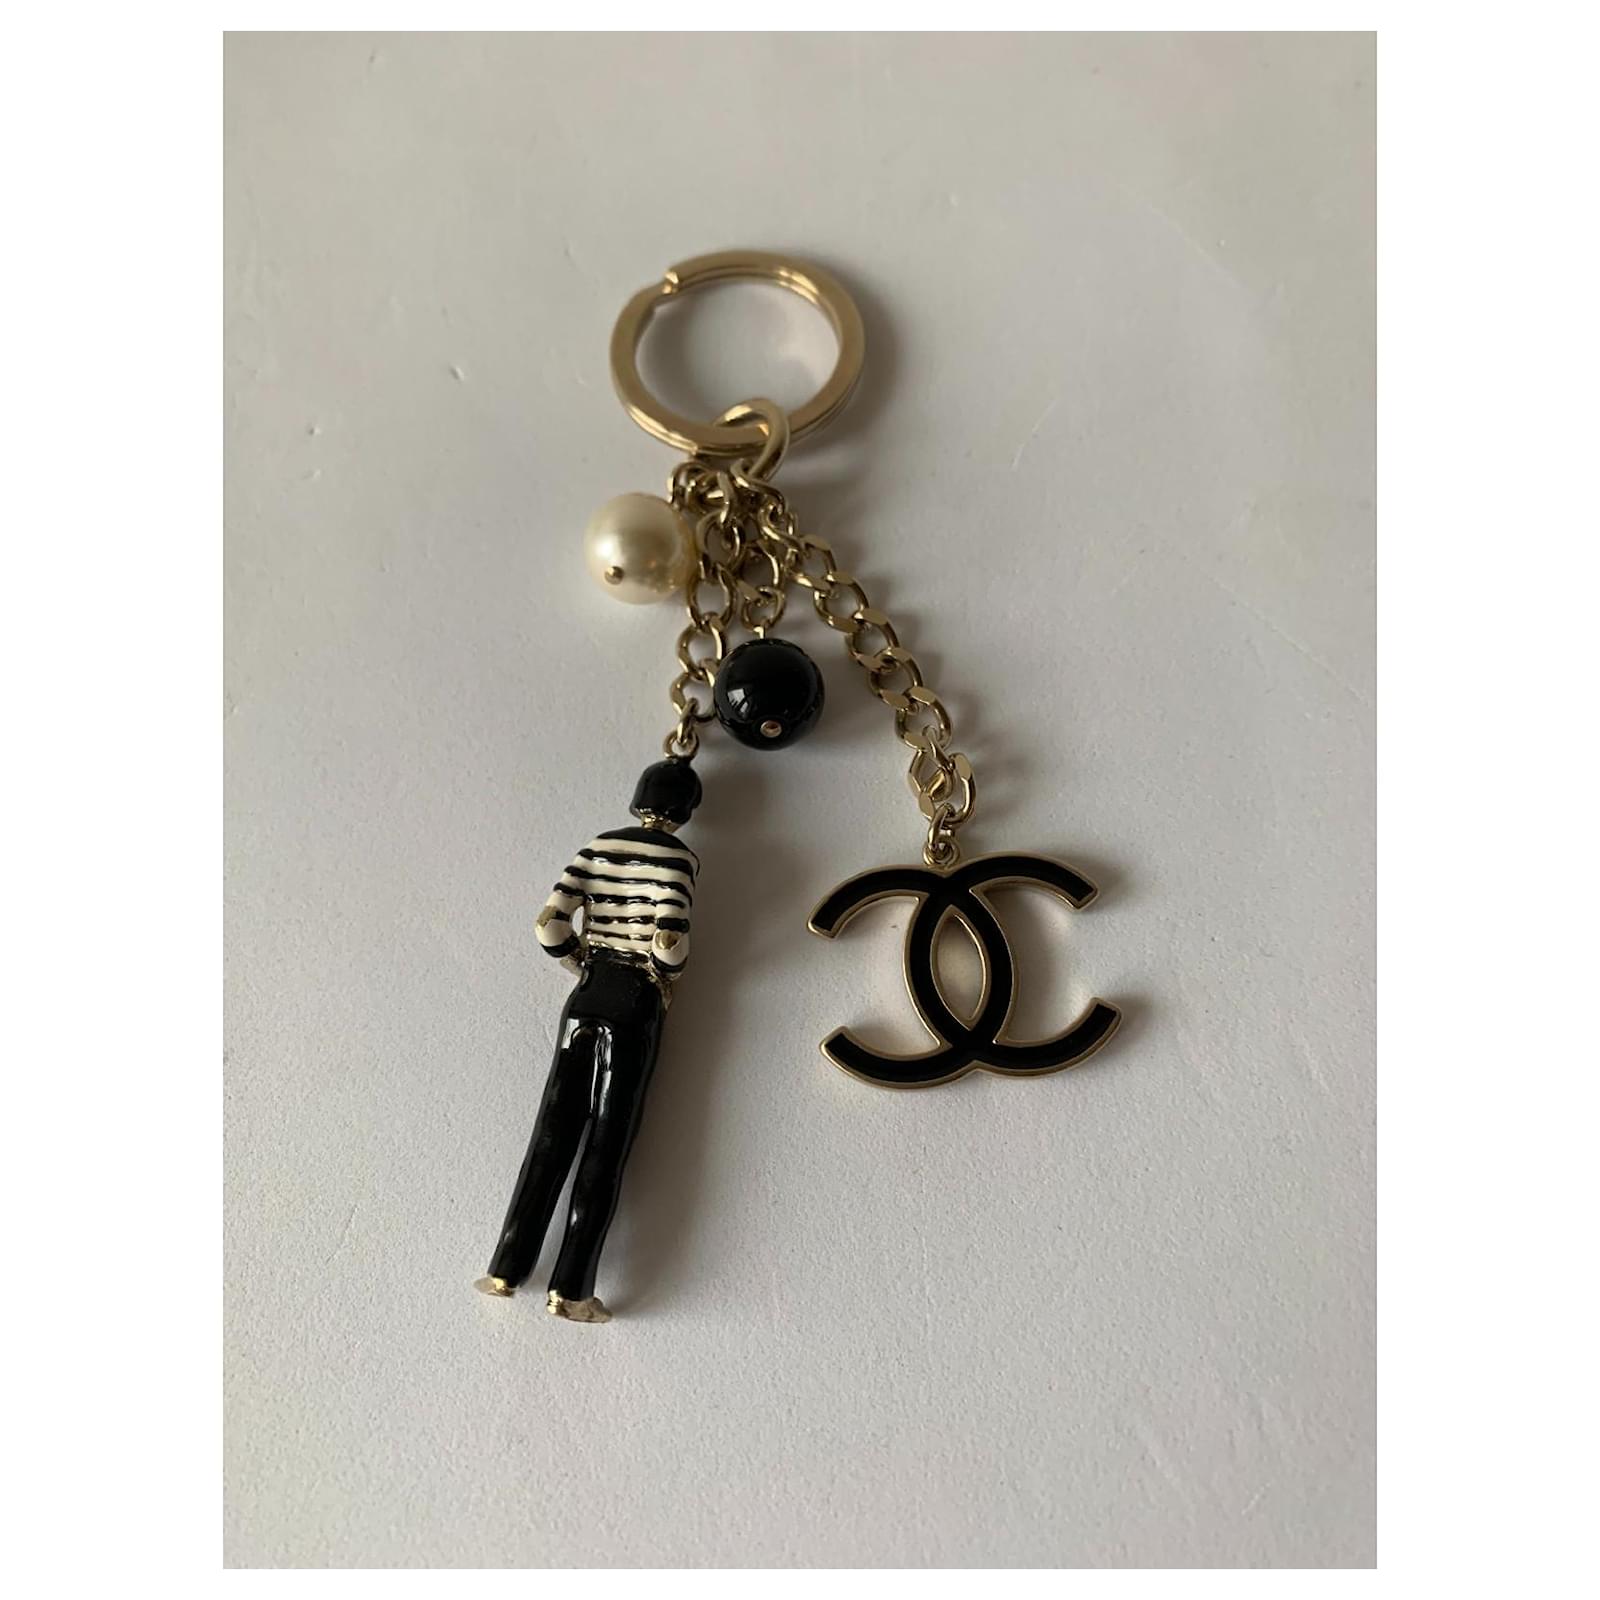 Shop CHANEL Logo Keychains & Bag Charms by saeccoo